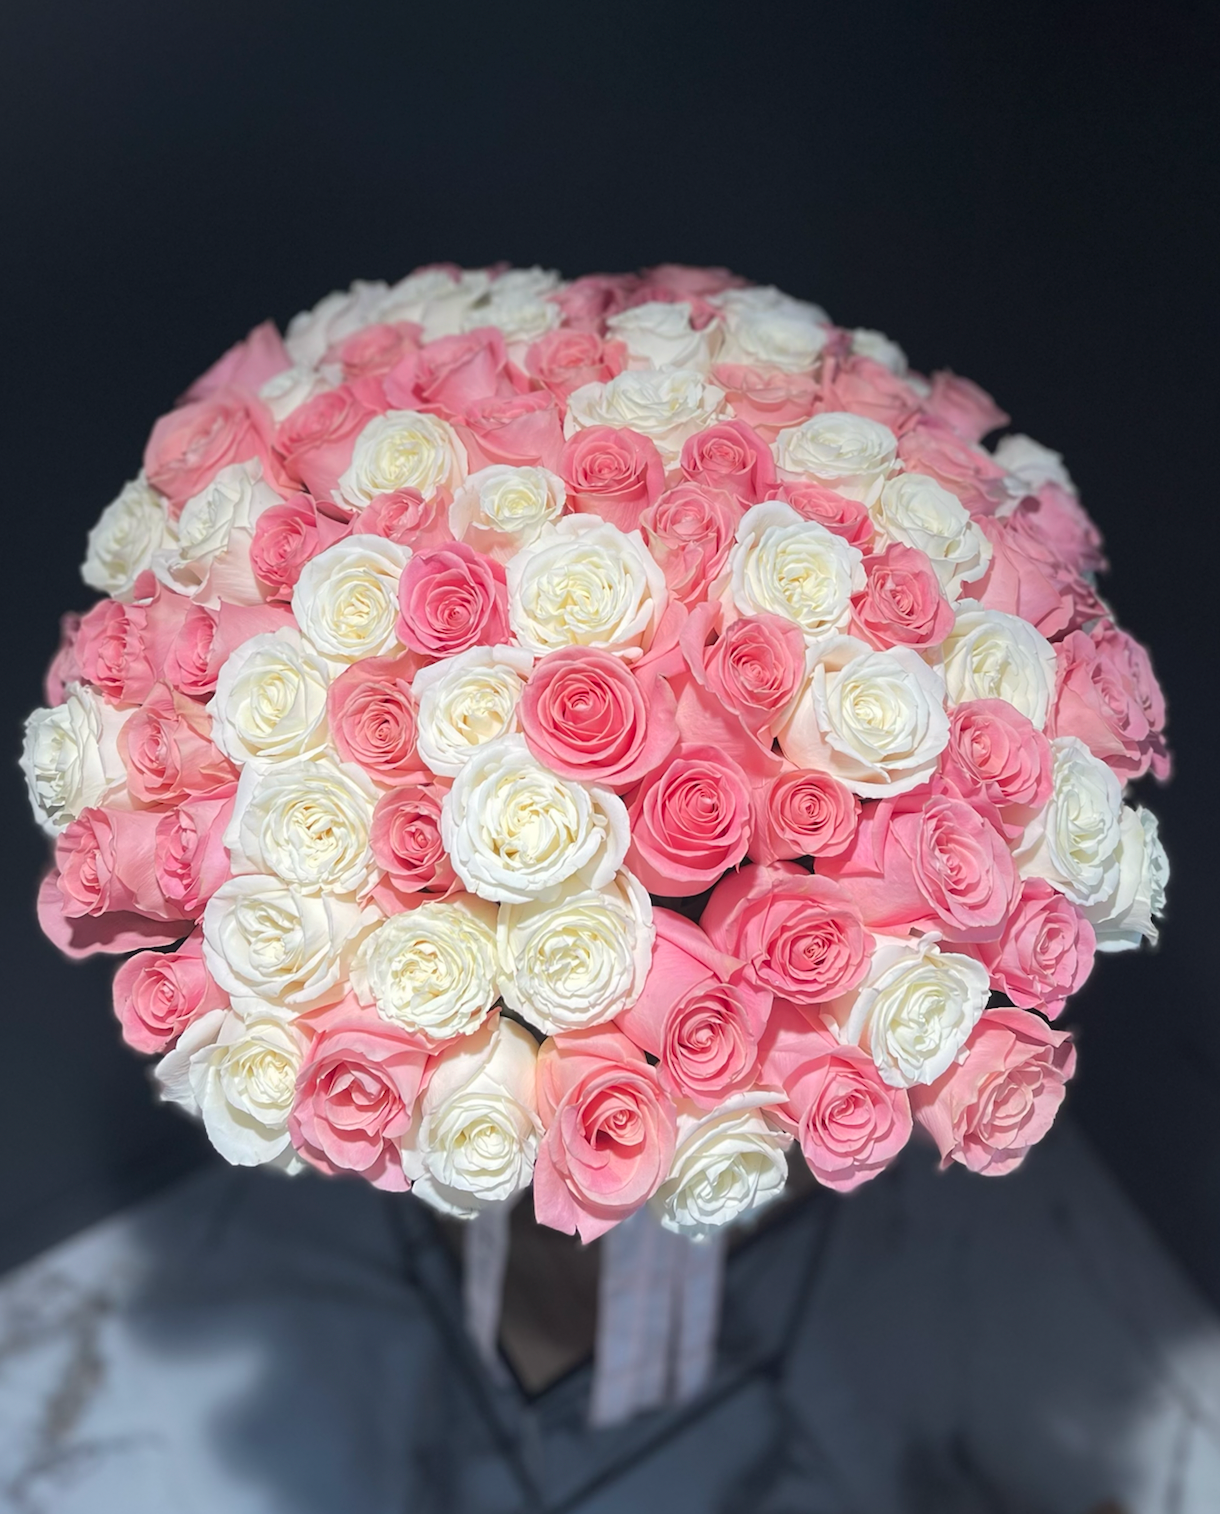 Bouquet in a vase “Pink &amp; white” - 100 roses